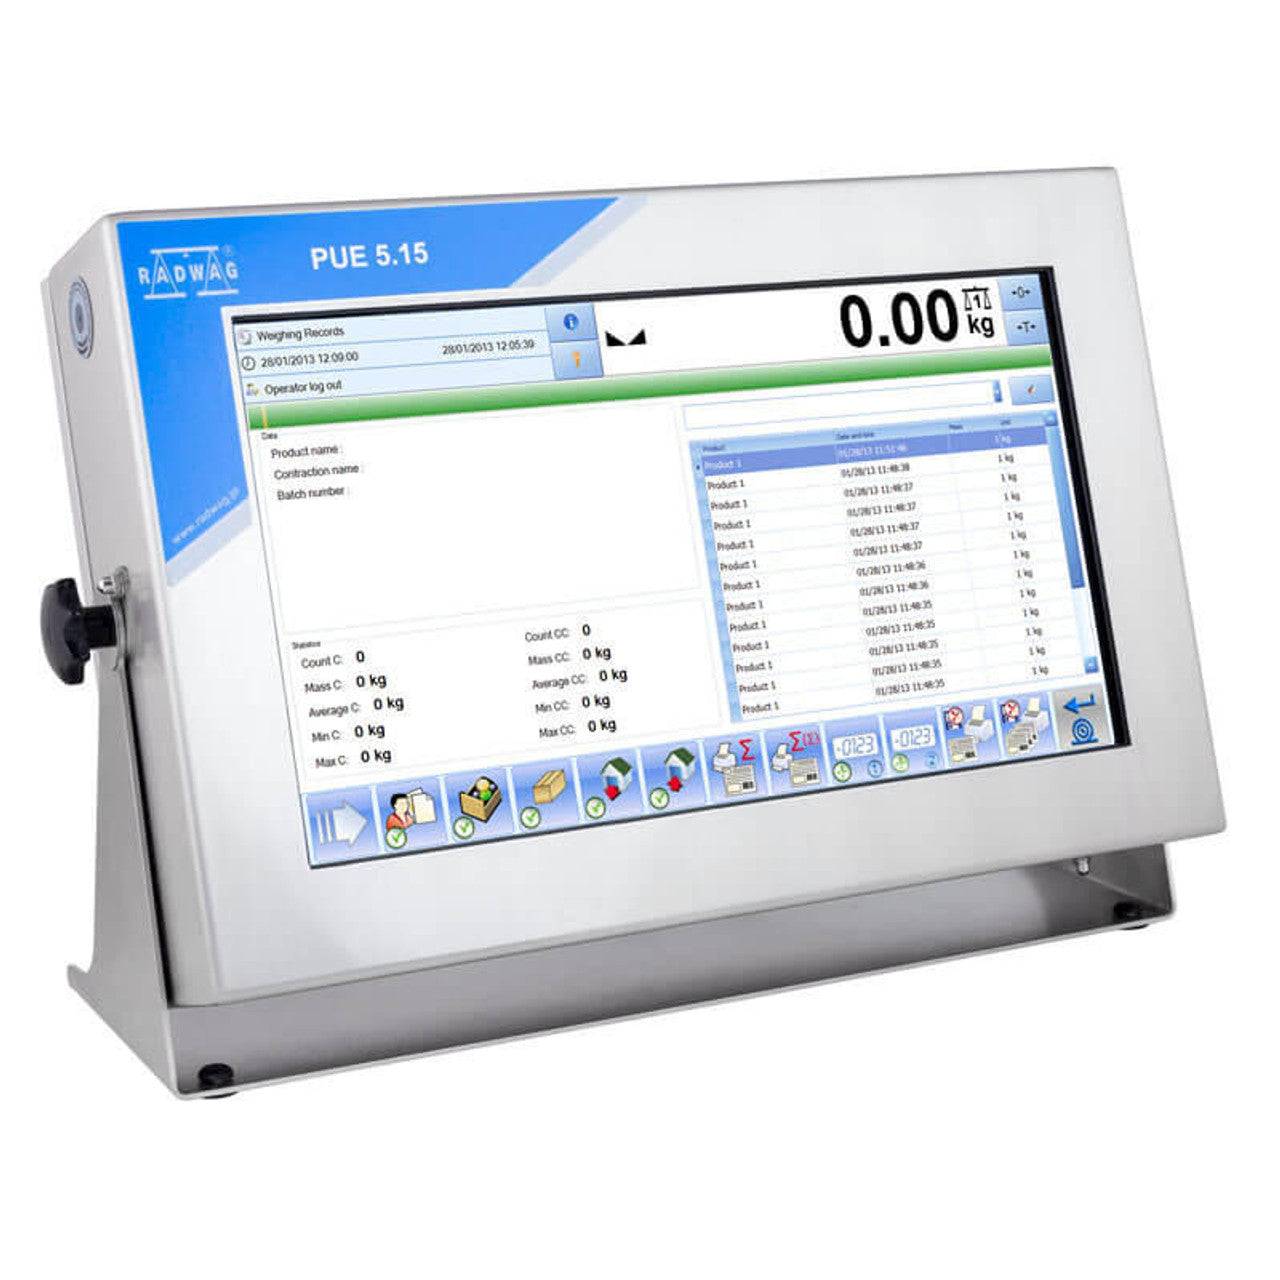 RADWAG PUE 5.19R/P (panel version) terminal - 19" resistive touch screen technology